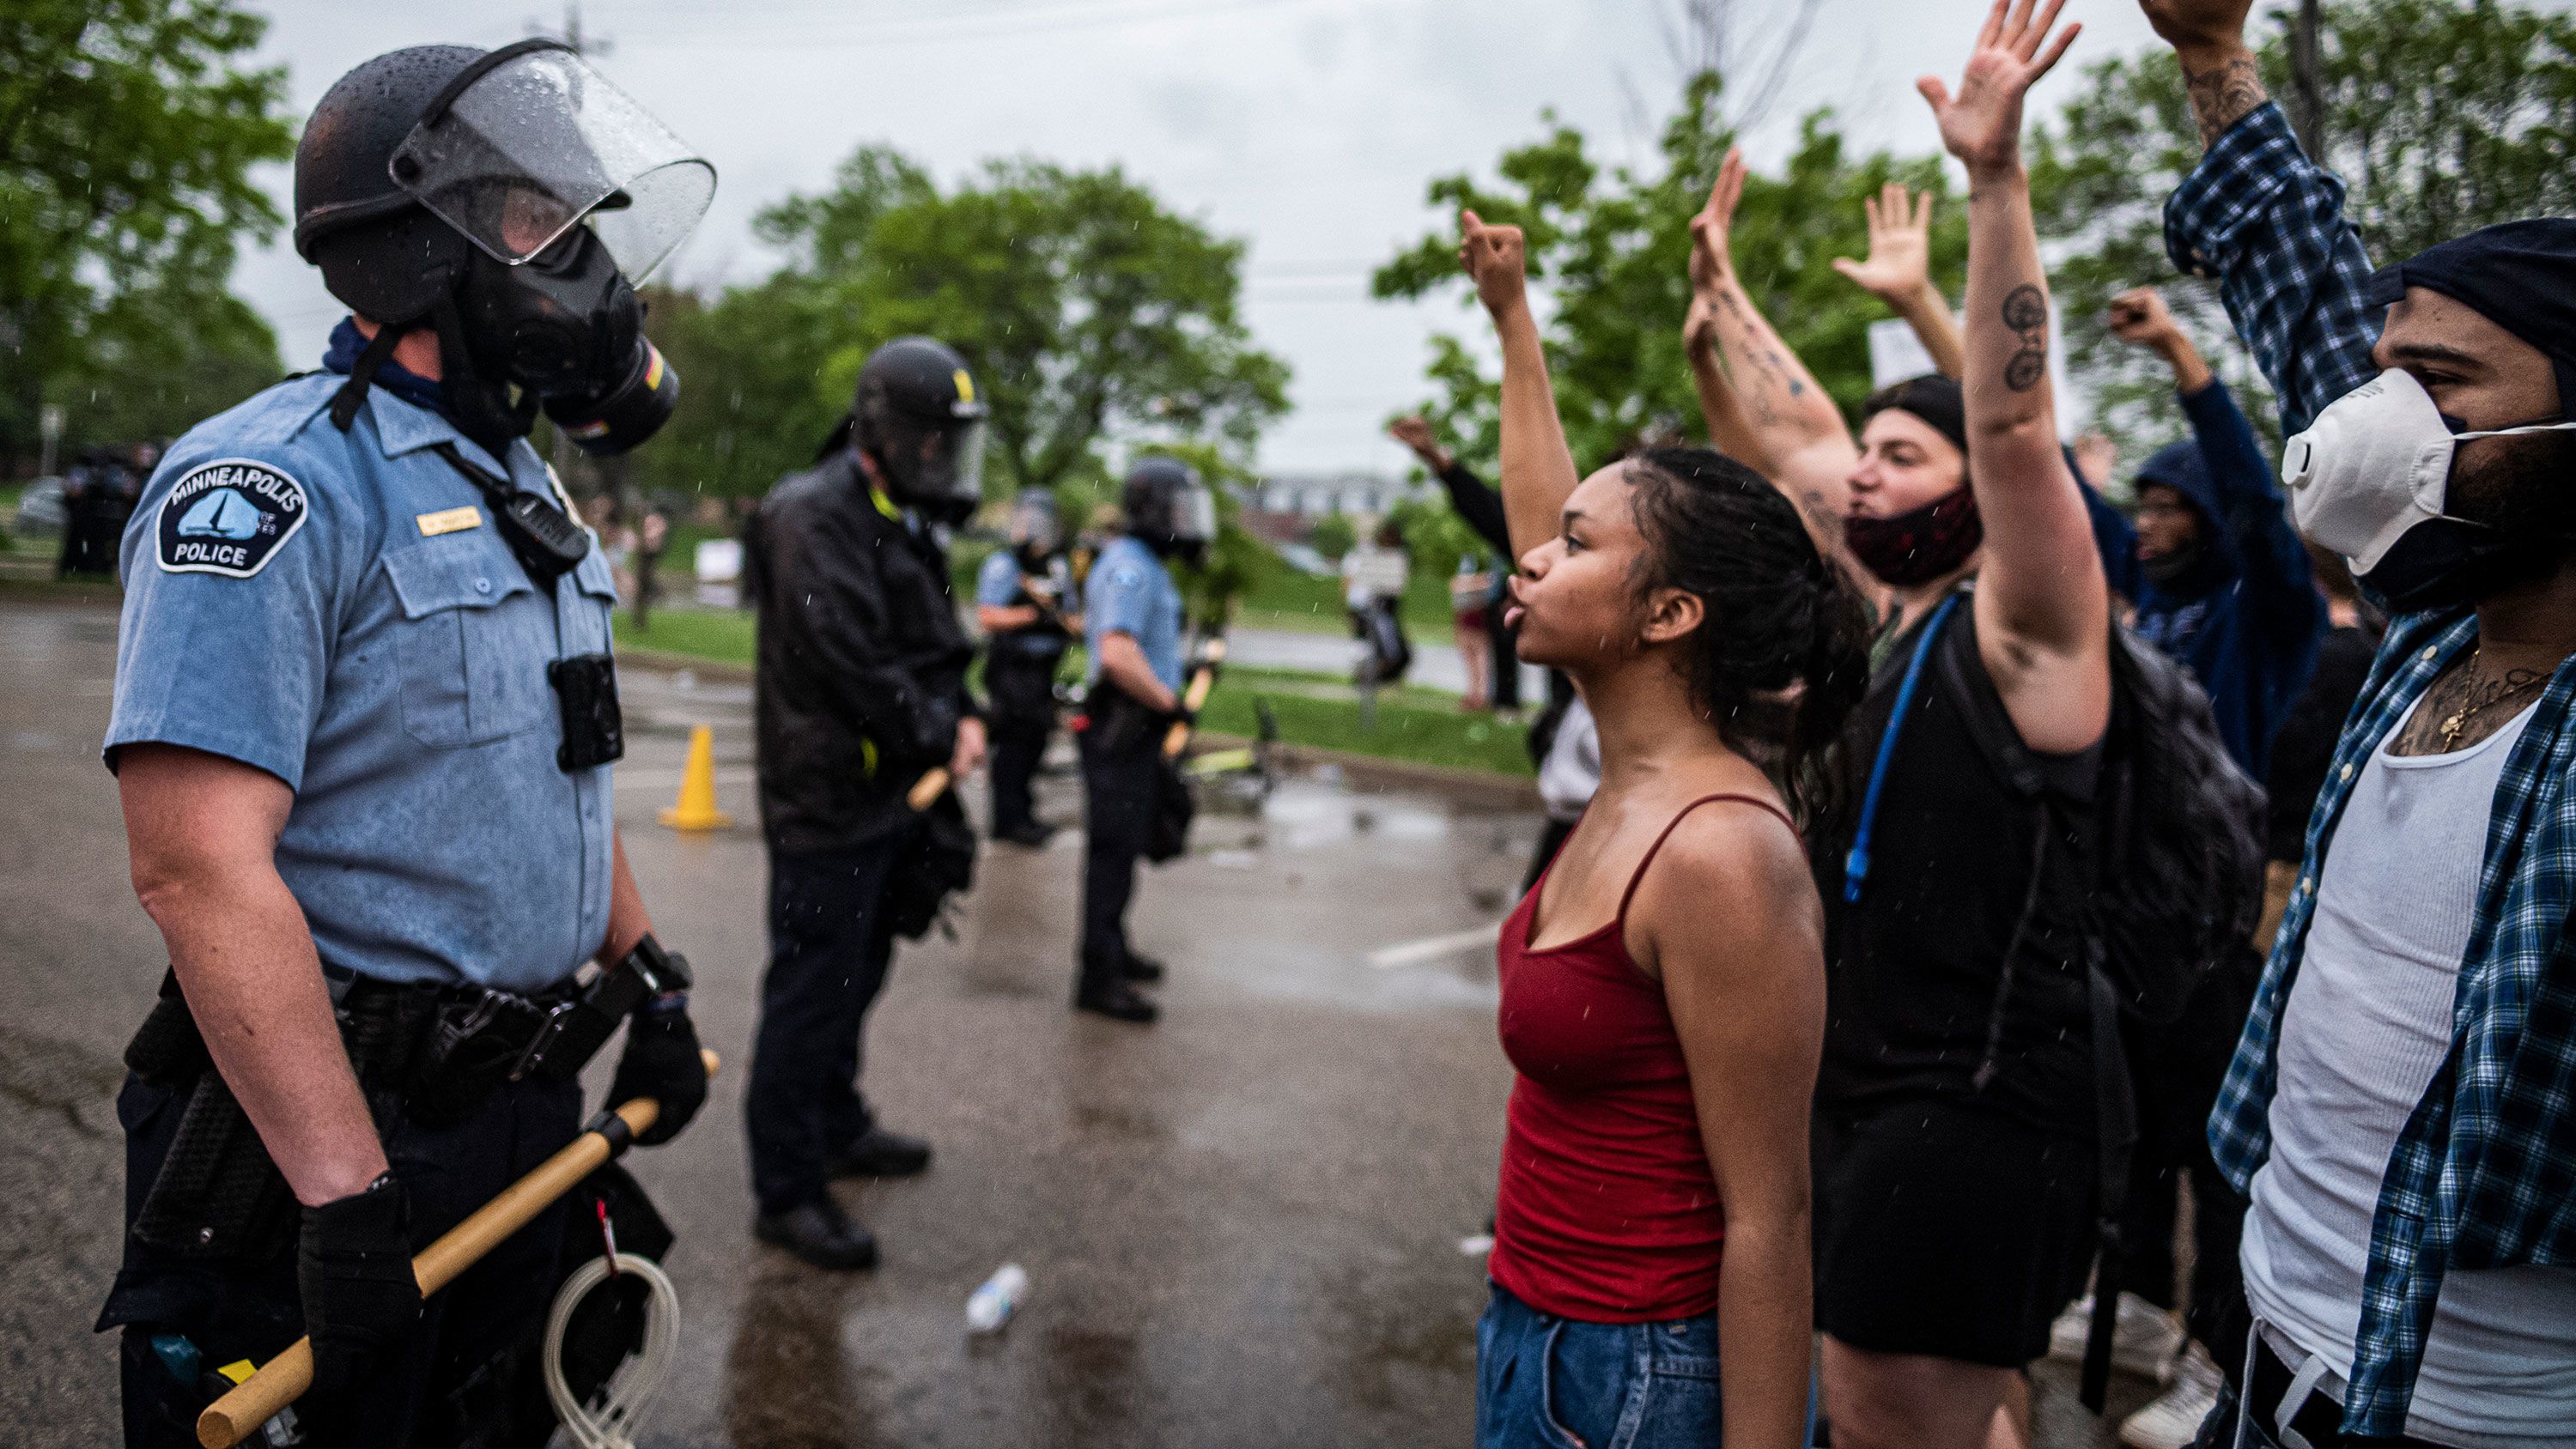 Photograph of several protesters with arms raised confonting a line of police wearing riot gear